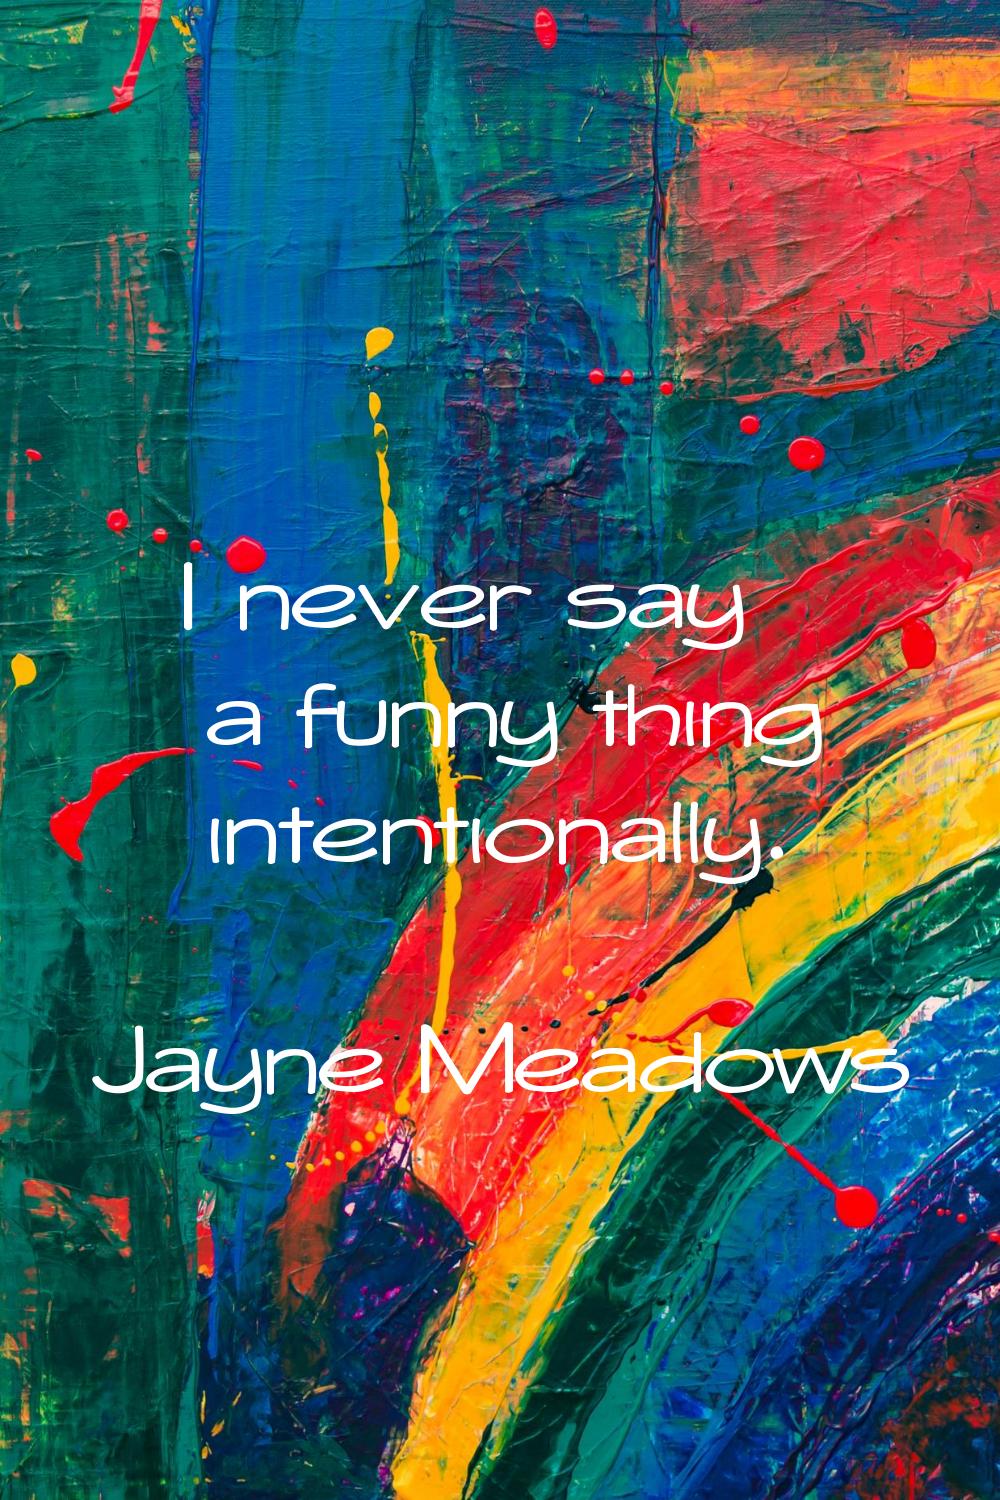 I never say a funny thing intentionally.